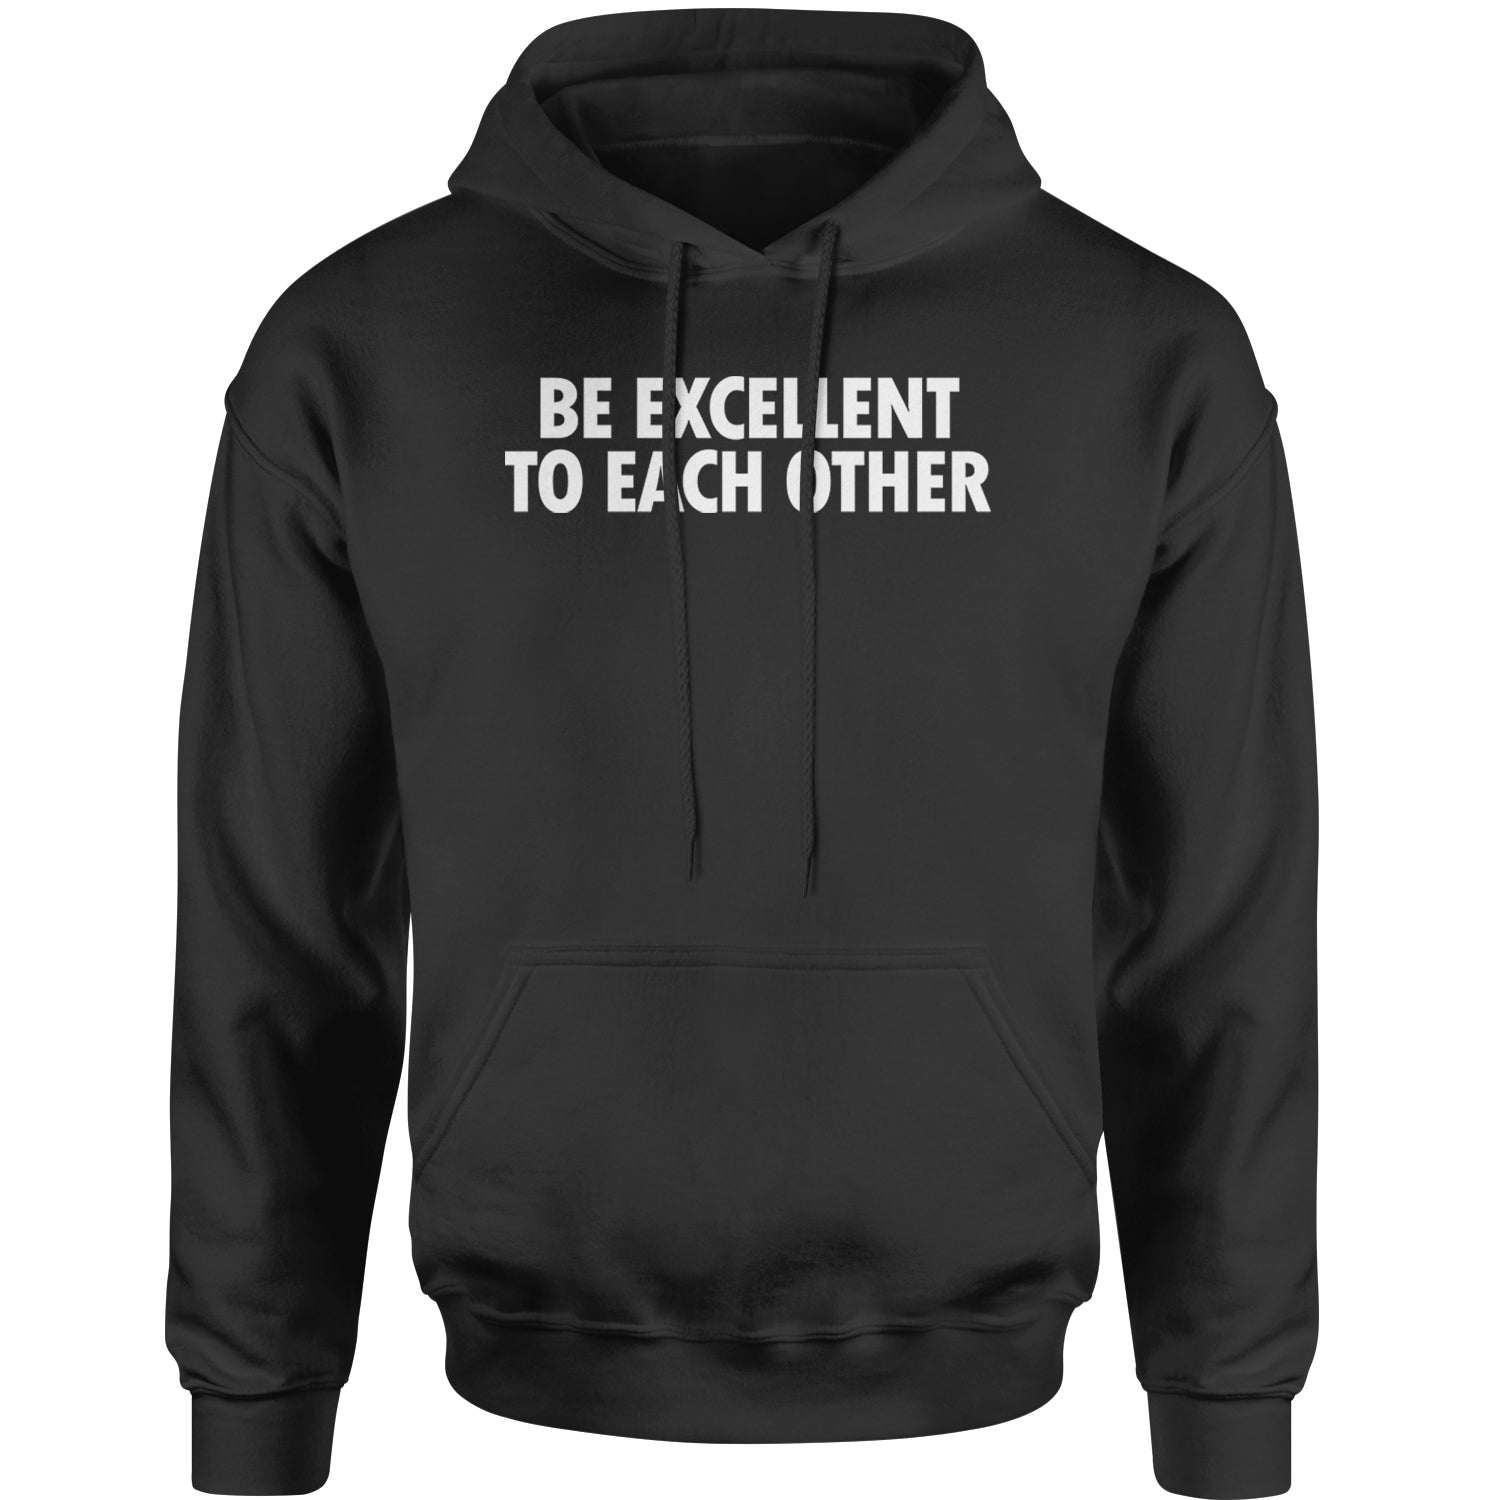 Be Excellent To Each Other Adult Hoodie Sweatshirt